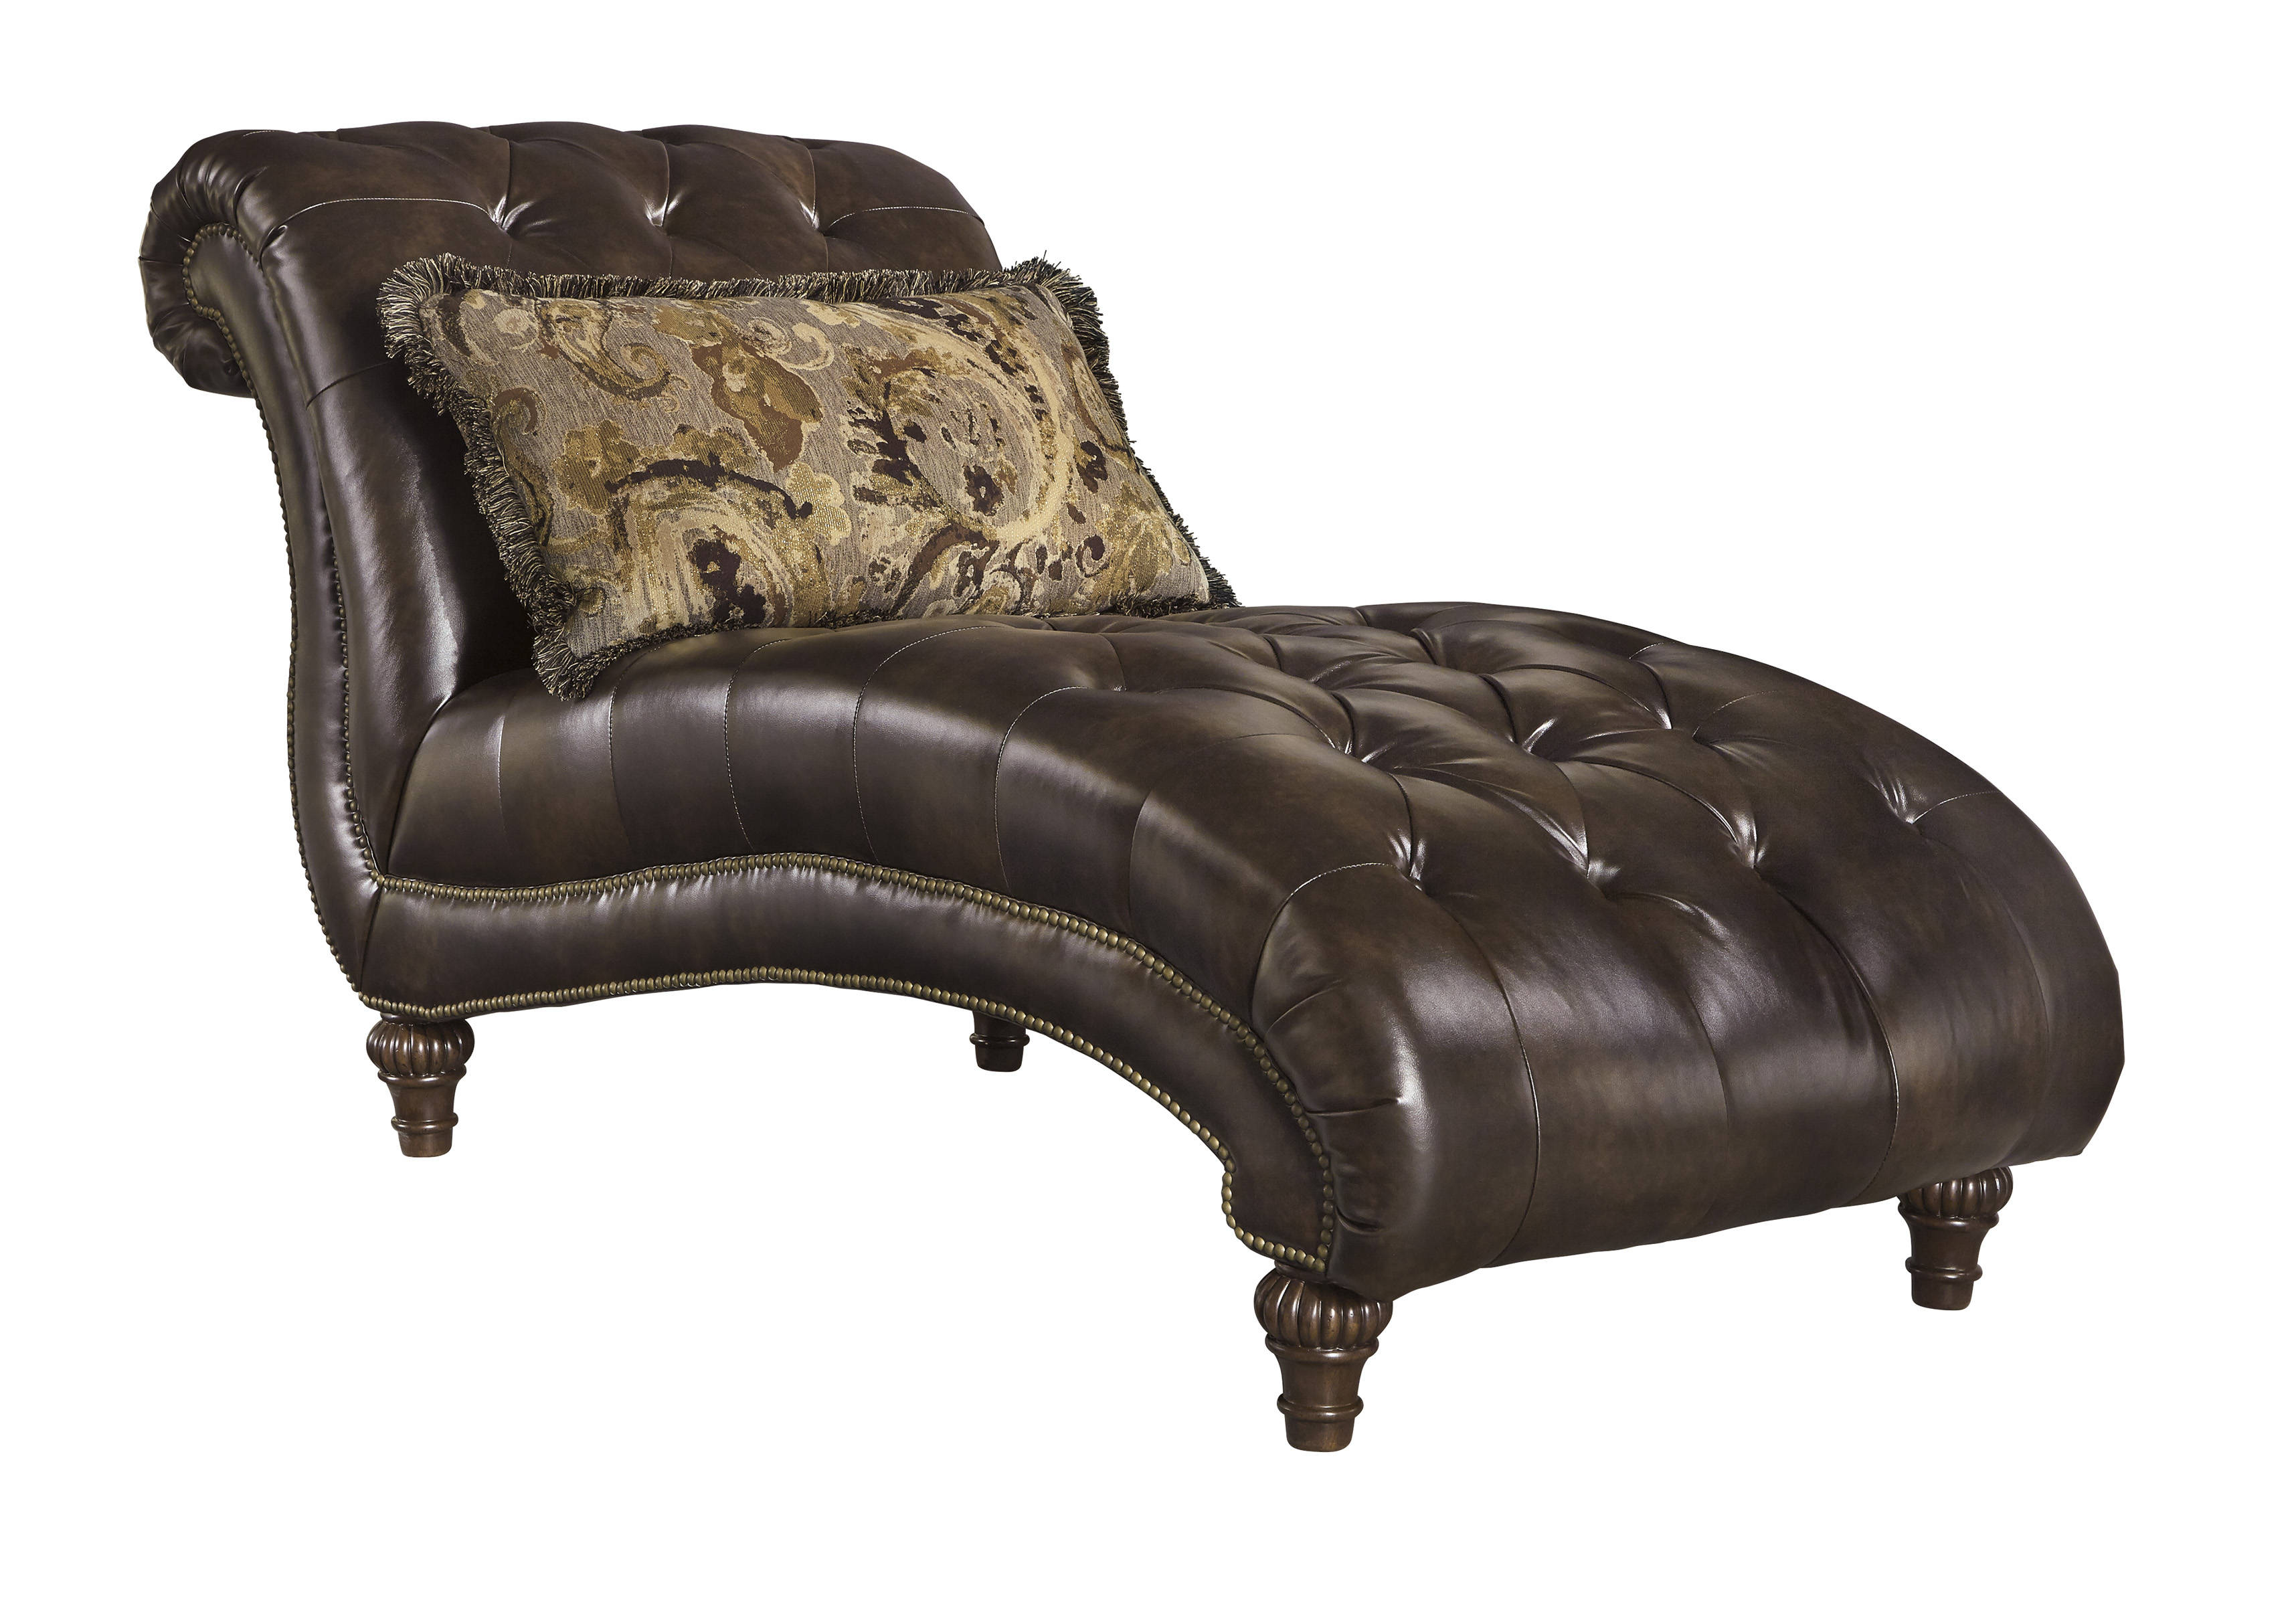 Ashley Furniture Winnsboro Durablend Chaise | The Classy Home intended for Ashley Furniture Lounge Chair